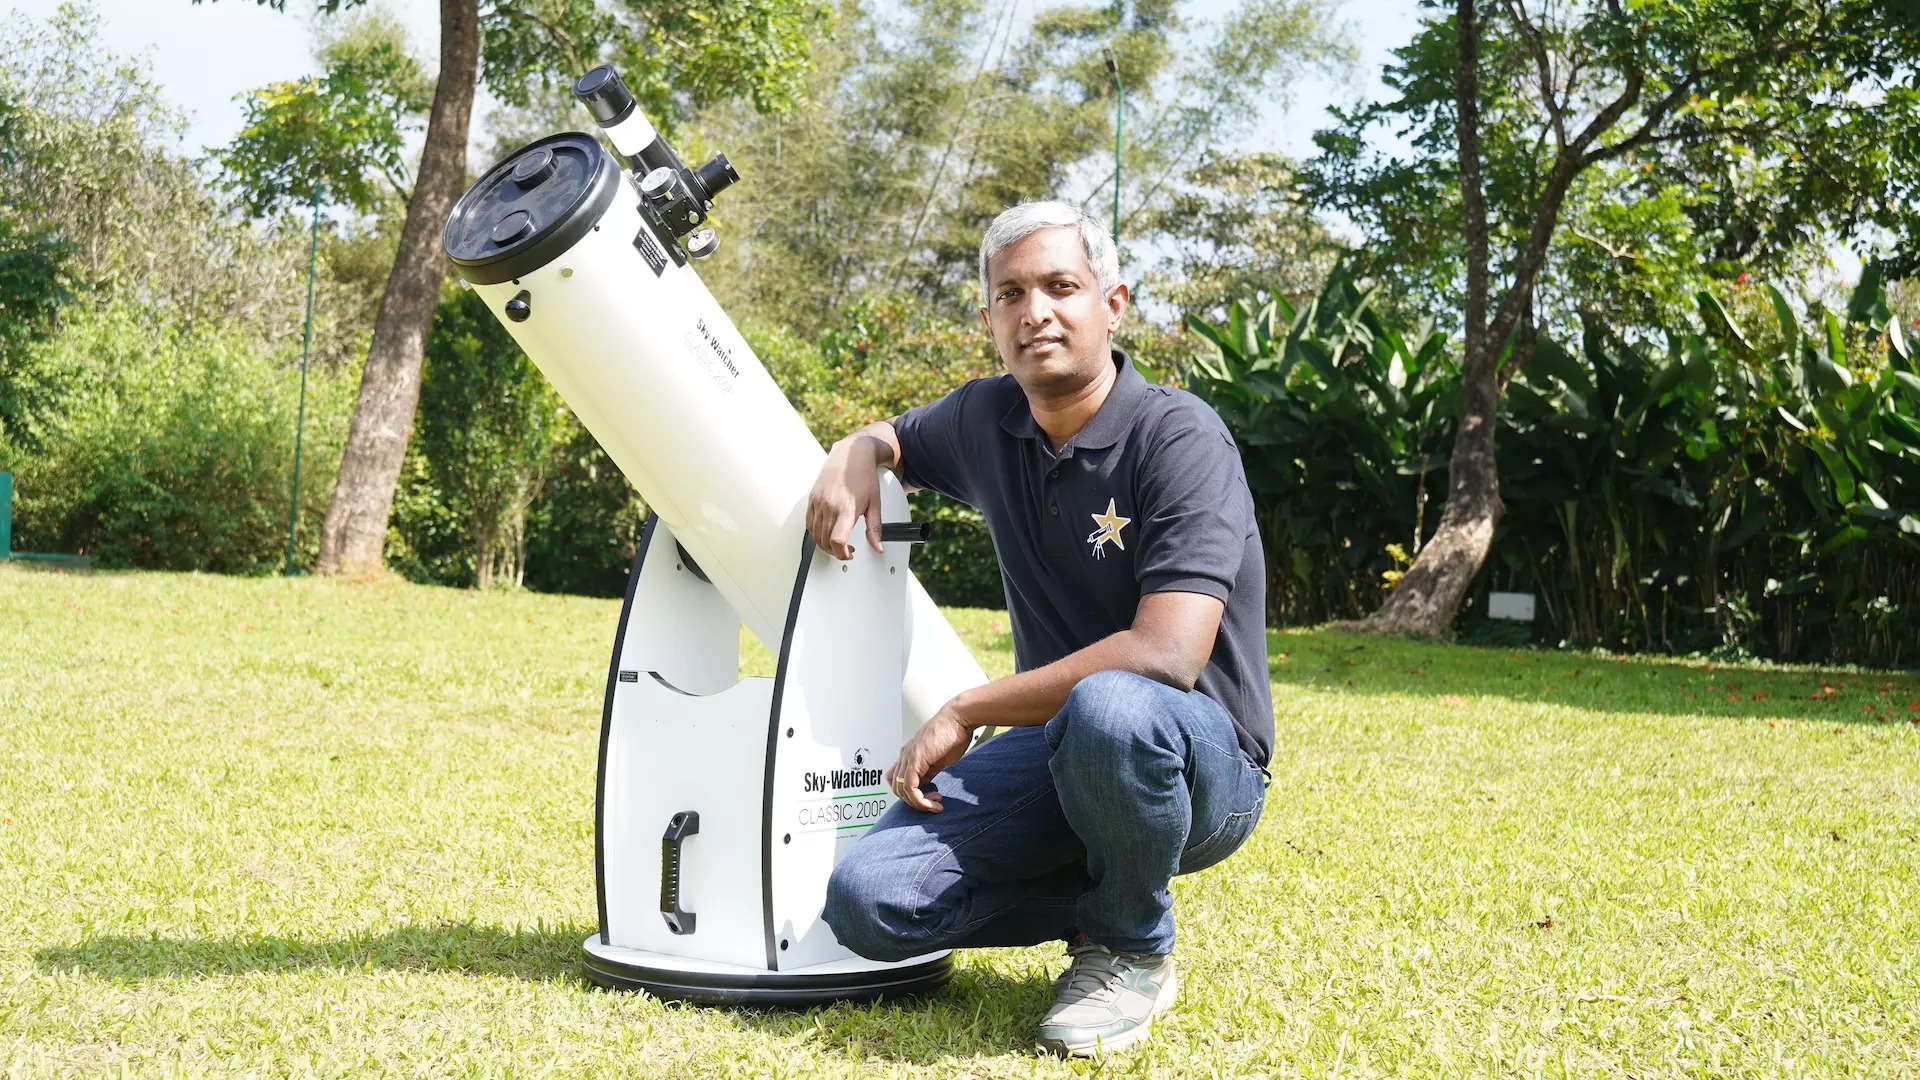 Stargazing is taking centre stage in India - Why is there a growing interest?